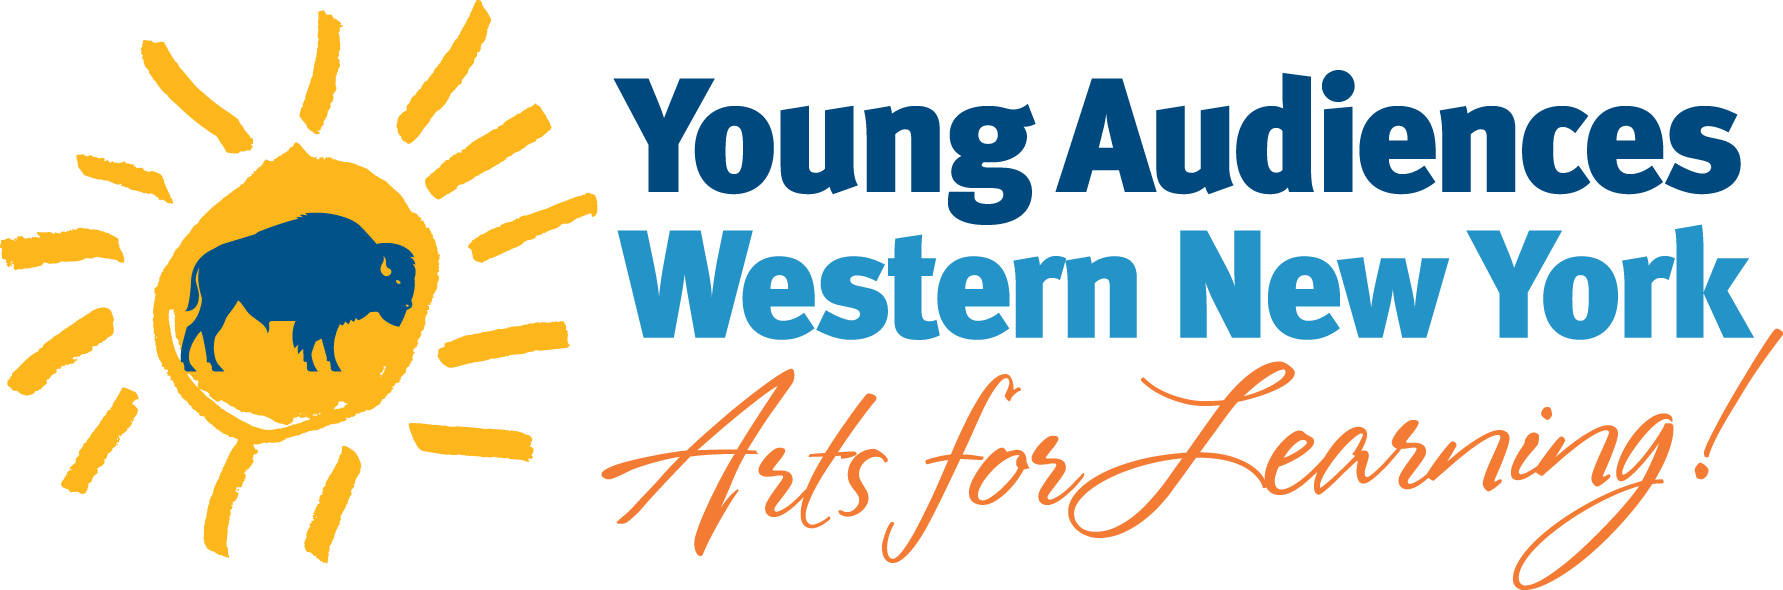 Young-Audiences-logo.png